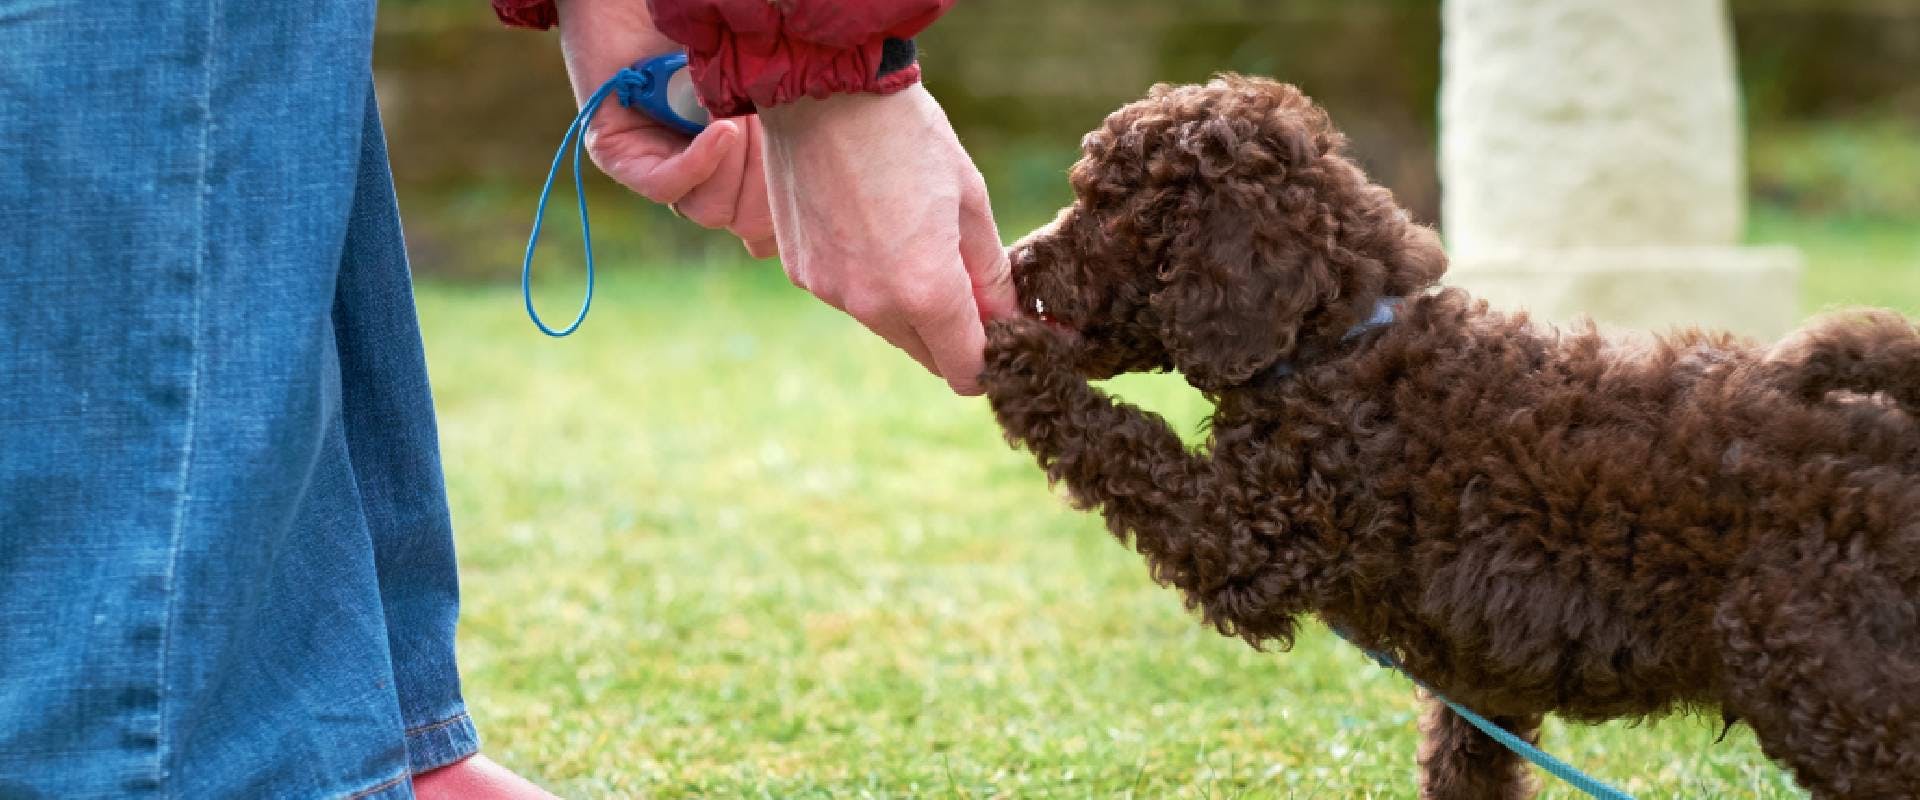 Puppy Poodle eating a puppy training treat